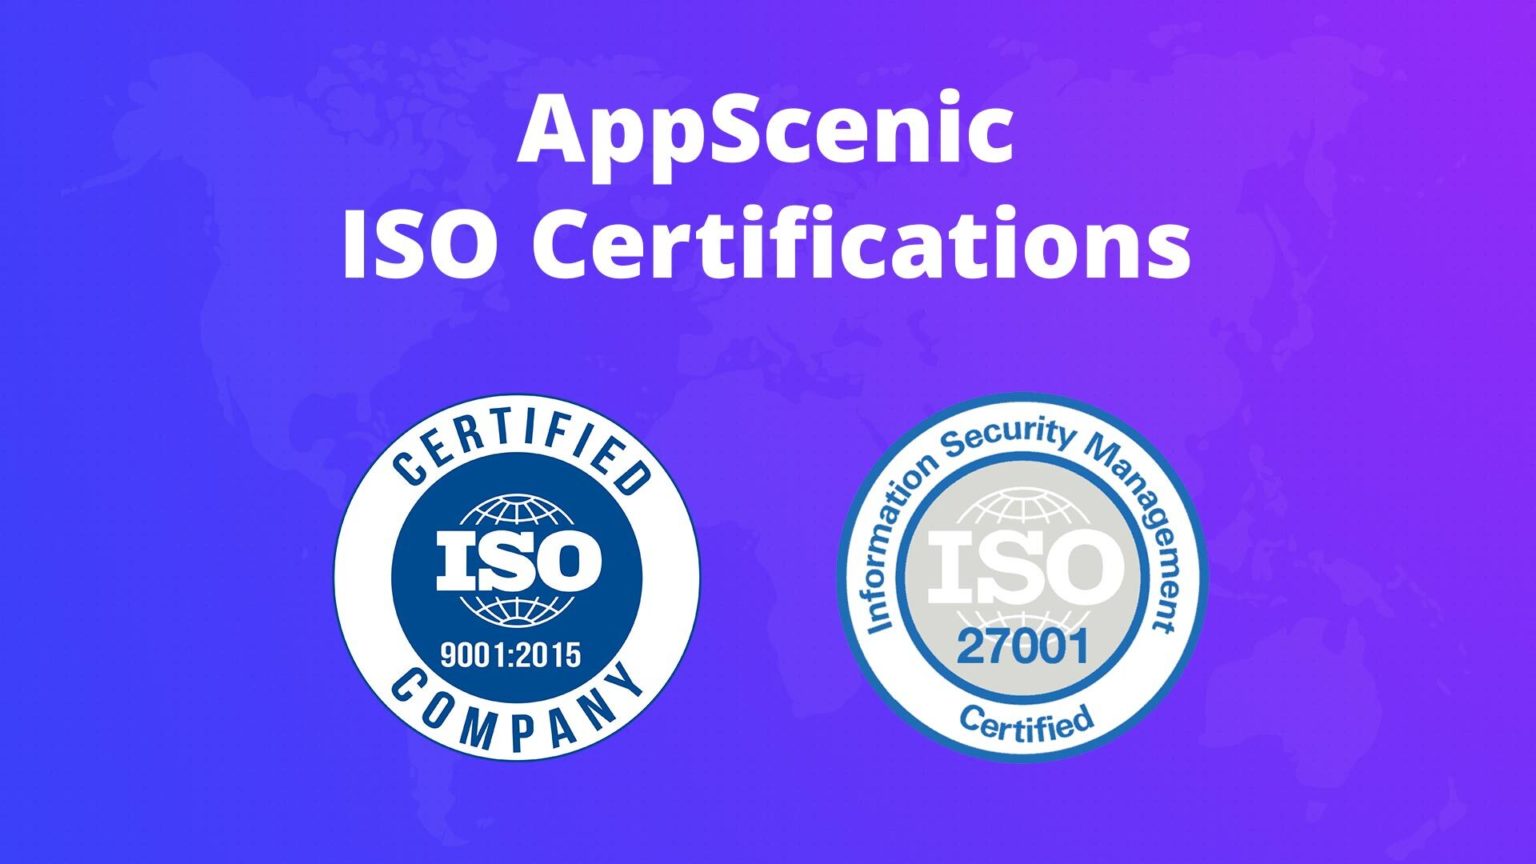 AppScenic ISO 9001 and ISO 27001 Certifications -  